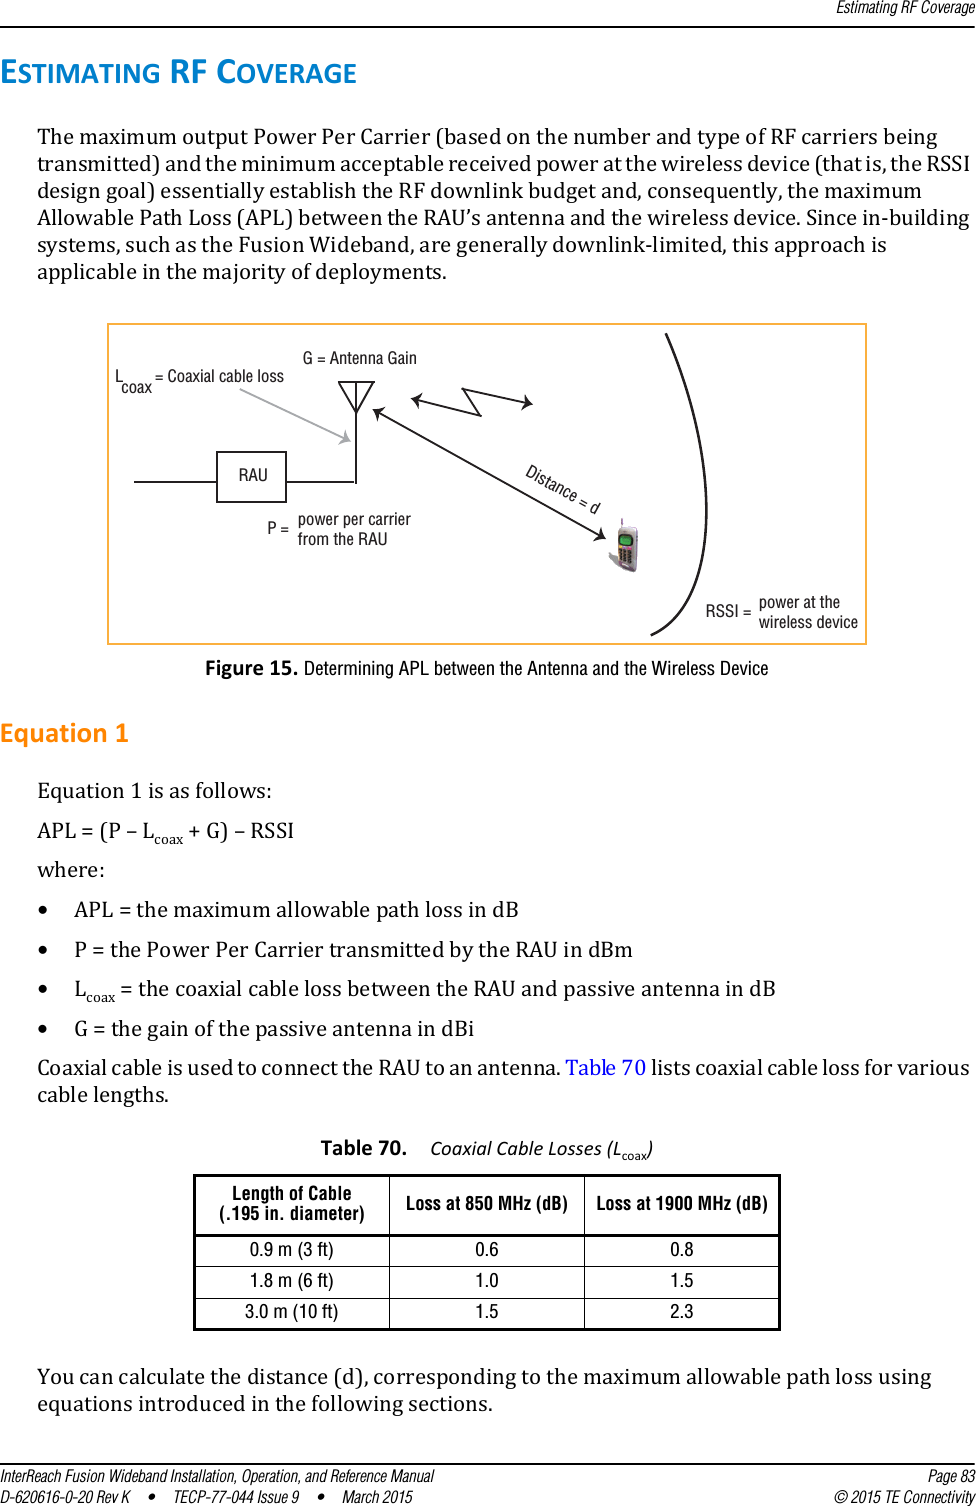 Estimating RF CoverageInterReach Fusion Wideband Installation, Operation, and Reference Manual Page 83D-620616-0-20 Rev K  •  TECP-77-044 Issue 9  •  March 2015 © 2015 TE ConnectivityESTIMATING RF COVERAGEThe maximum output Power Per Carrier (based on the number and type of RF carriers being transmitted) and the minimum acceptable received power at the wireless device (that is, the RSSI design goal) essentially establish the RF downlink budget and, consequently, the maximum Allowable Path Loss (APL) between the RAU’s antenna and the wireless device. Since in-building systems, such as the Fusion Wideband, are generally downlink-limited, this approach is applicable in the majority of deployments.Figure 15. Determining APL between the Antenna and the Wireless DeviceEquation 1Equation 1 is as follows:APL = (P – Lcoax + G) – RSSIwhere:•APL = the maximum allowable path loss in dB•P = the Power Per Carrier transmitted by the RAU in dBm•Lcoax = the coaxial cable loss between the RAU and passive antenna in dB•G = the gain of the passive antenna in dBiCoaxial cable is used to connect the RAU to an antenna. Table 70 lists coaxial cable loss for various cable lengths.You can calculate the distance (d), corresponding to the maximum allowable path loss using equations introduced in the following sections.Table 70. Coaxial Cable Losses (Lcoax)Length of Cable (.195 in. diameter) Loss at 850 MHz (dB) Loss at 1900 MHz (dB)0.9 m (3 ft) 0.6 0.81.8 m (6 ft) 1.0 1.53.0 m (10 ft) 1.5 2.3RAURSSI =  power at thewireless deviceDistance = dG = Antenna GainP = power per carrierfrom the RAULcoax = Coaxial cable loss